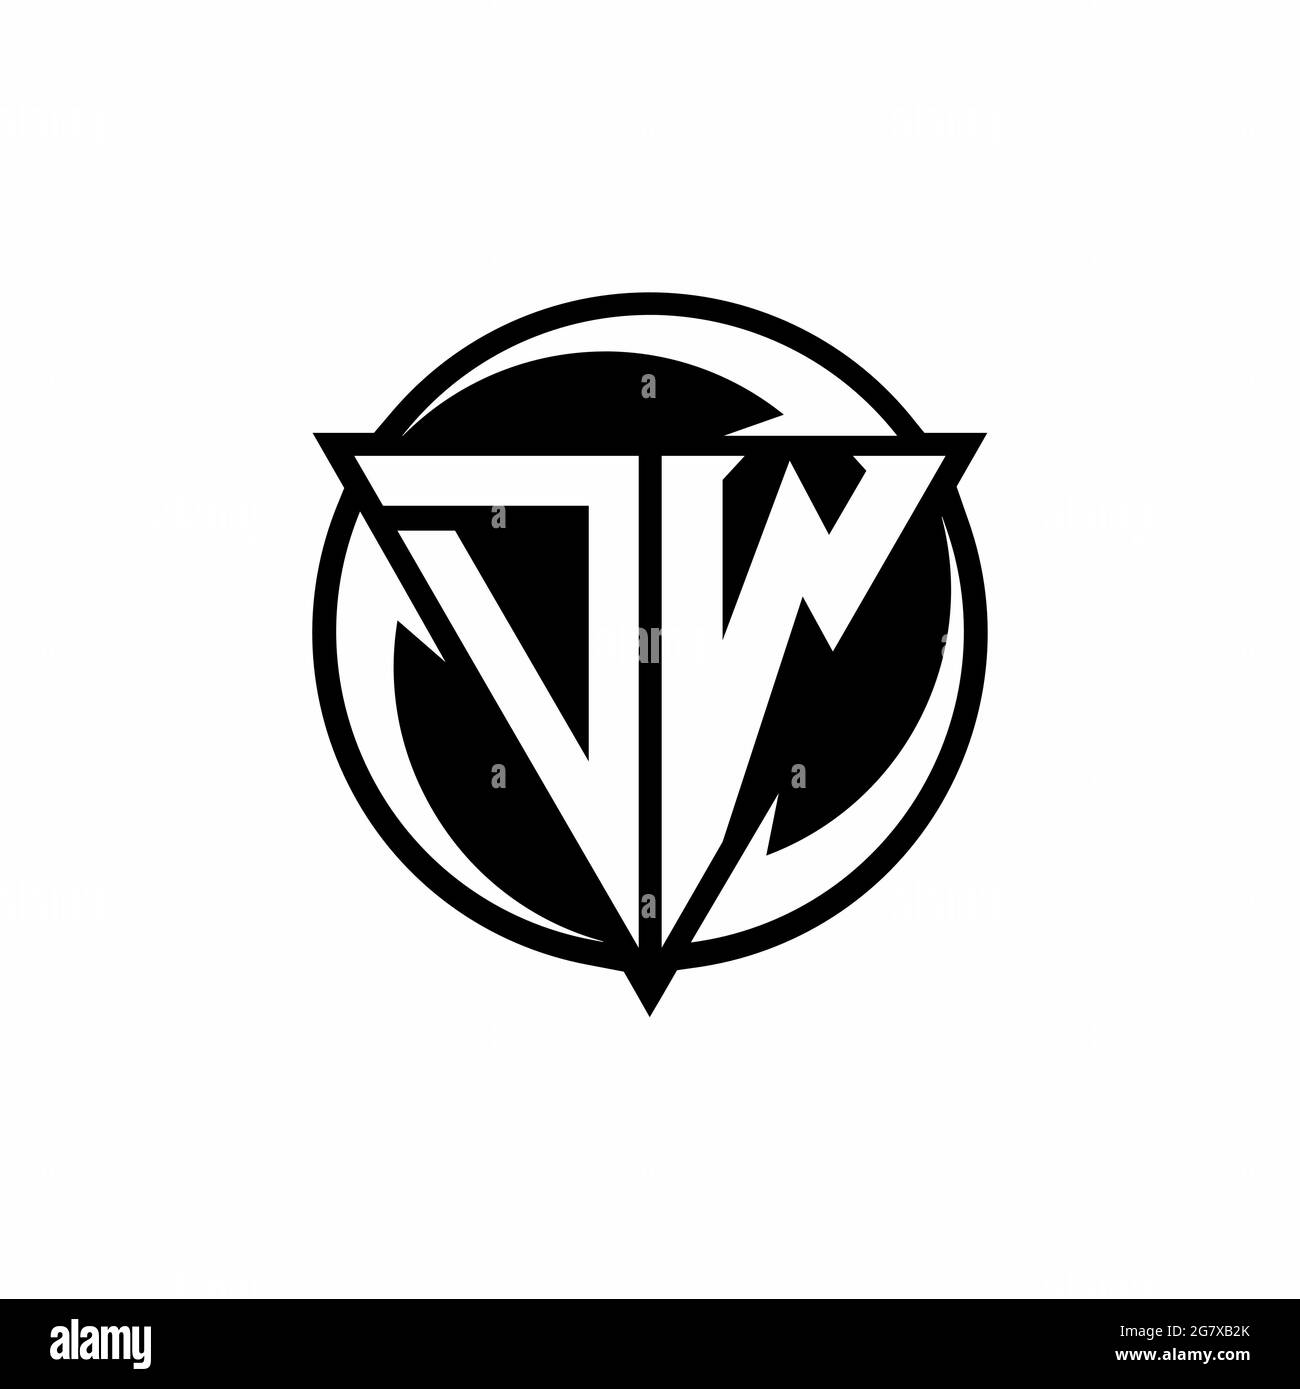 DW logo with triangle shape and circle rounded design template isolated on white background Stock Vector